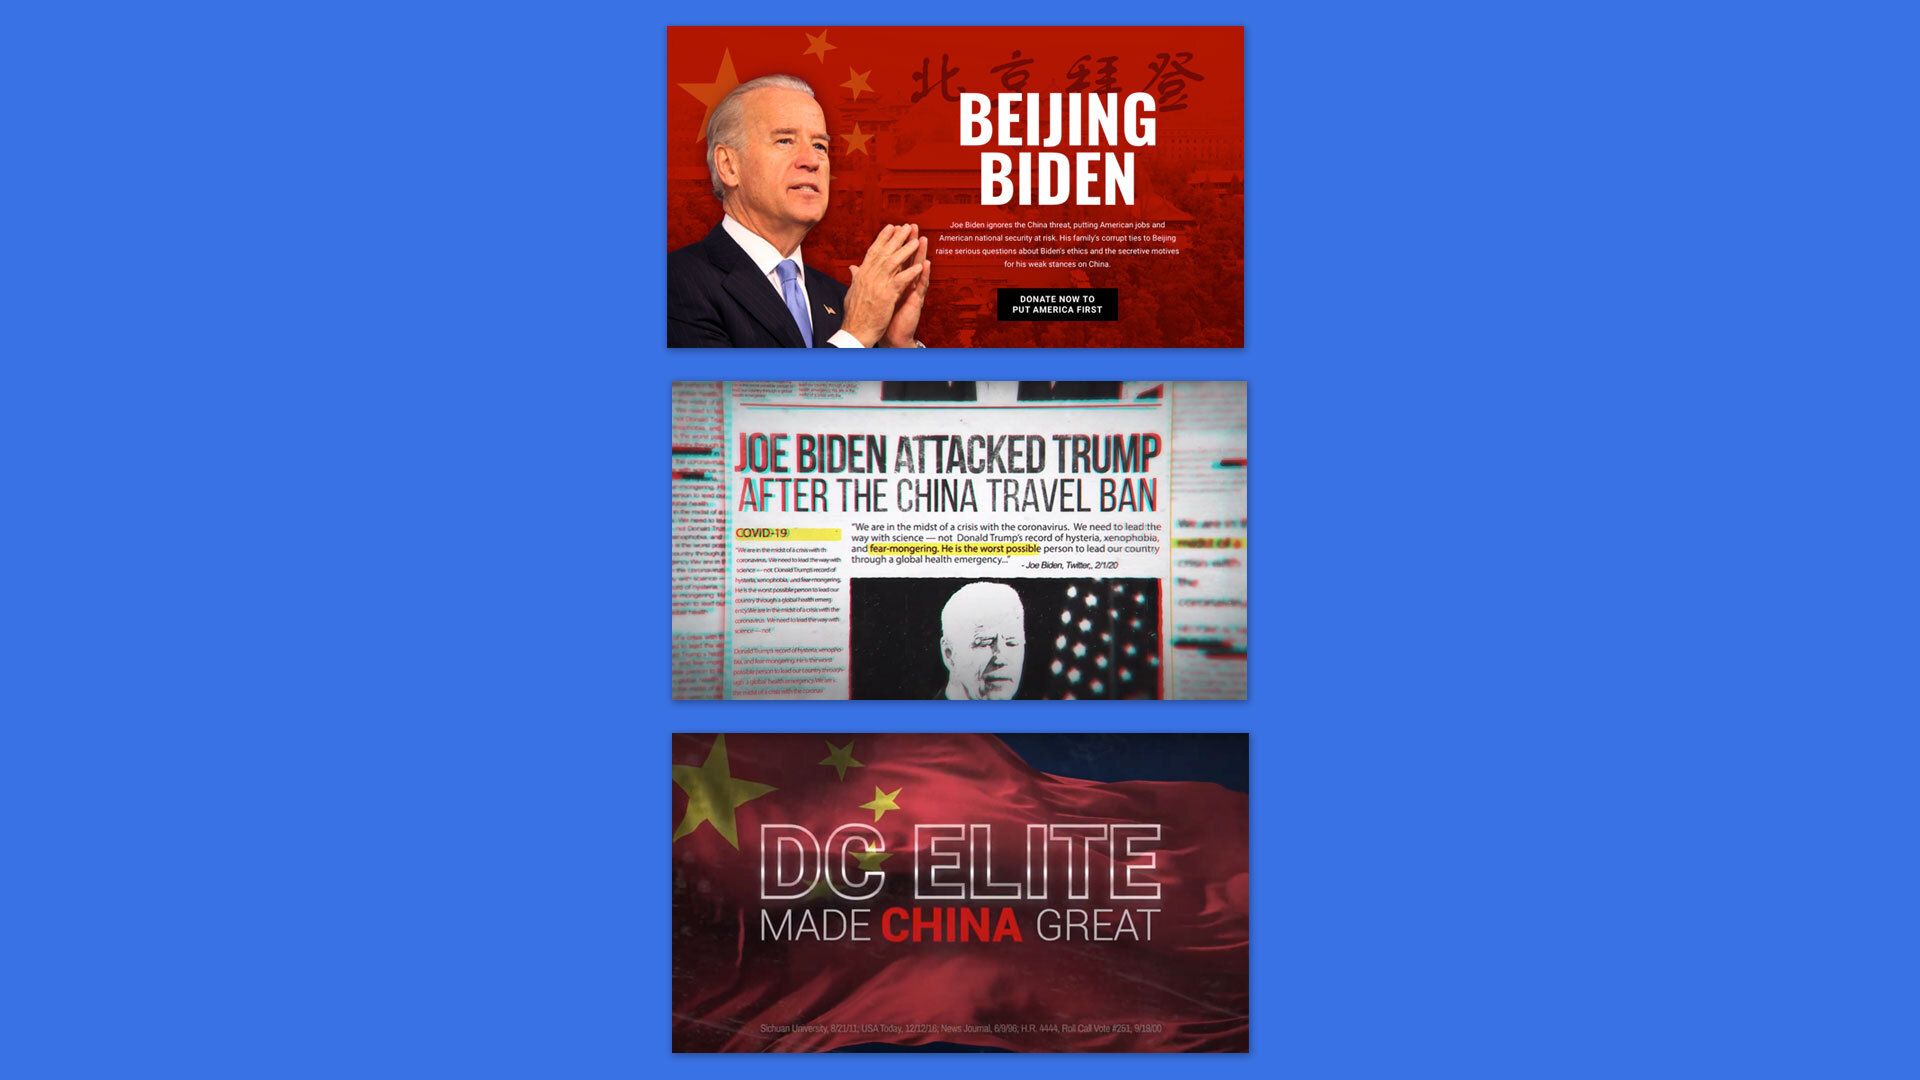 Screen grabs from America First Action's #BeijingBiden ad campaign